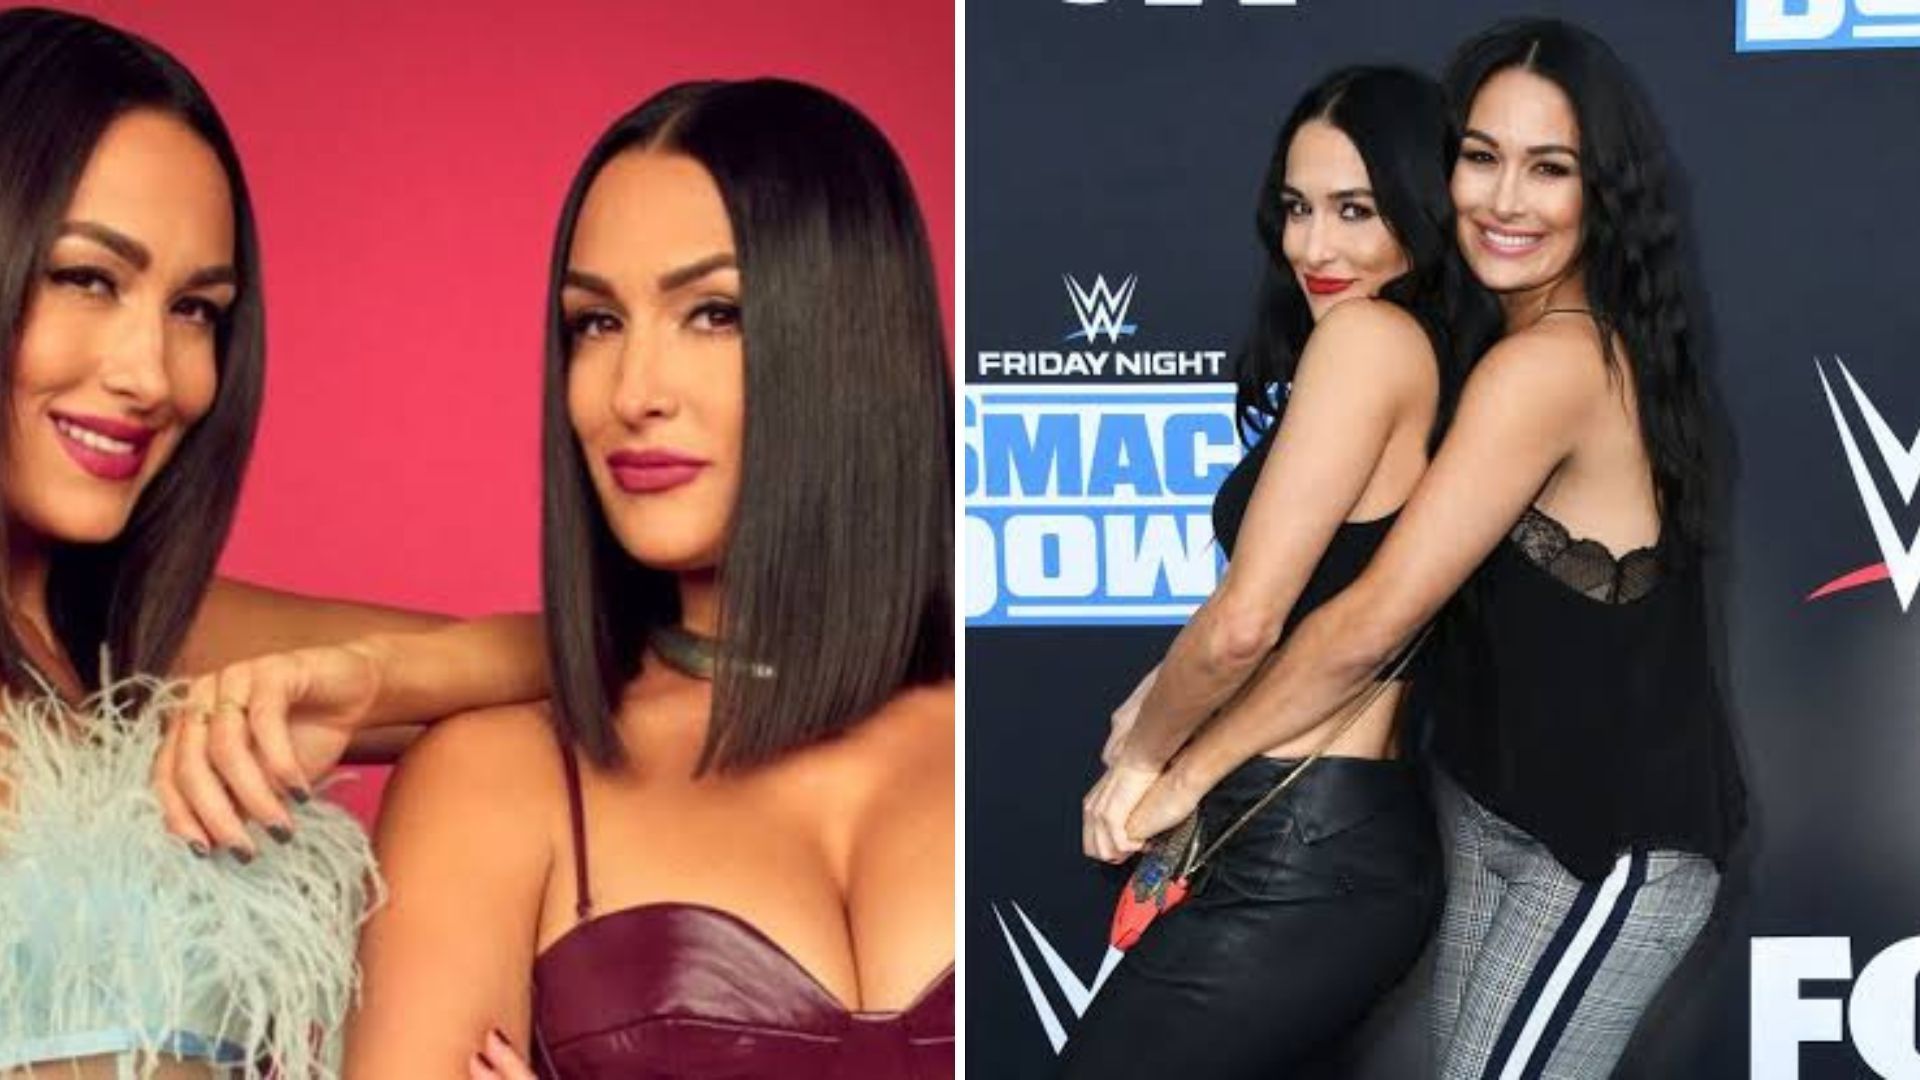 The Bella Twins recently left WWE.